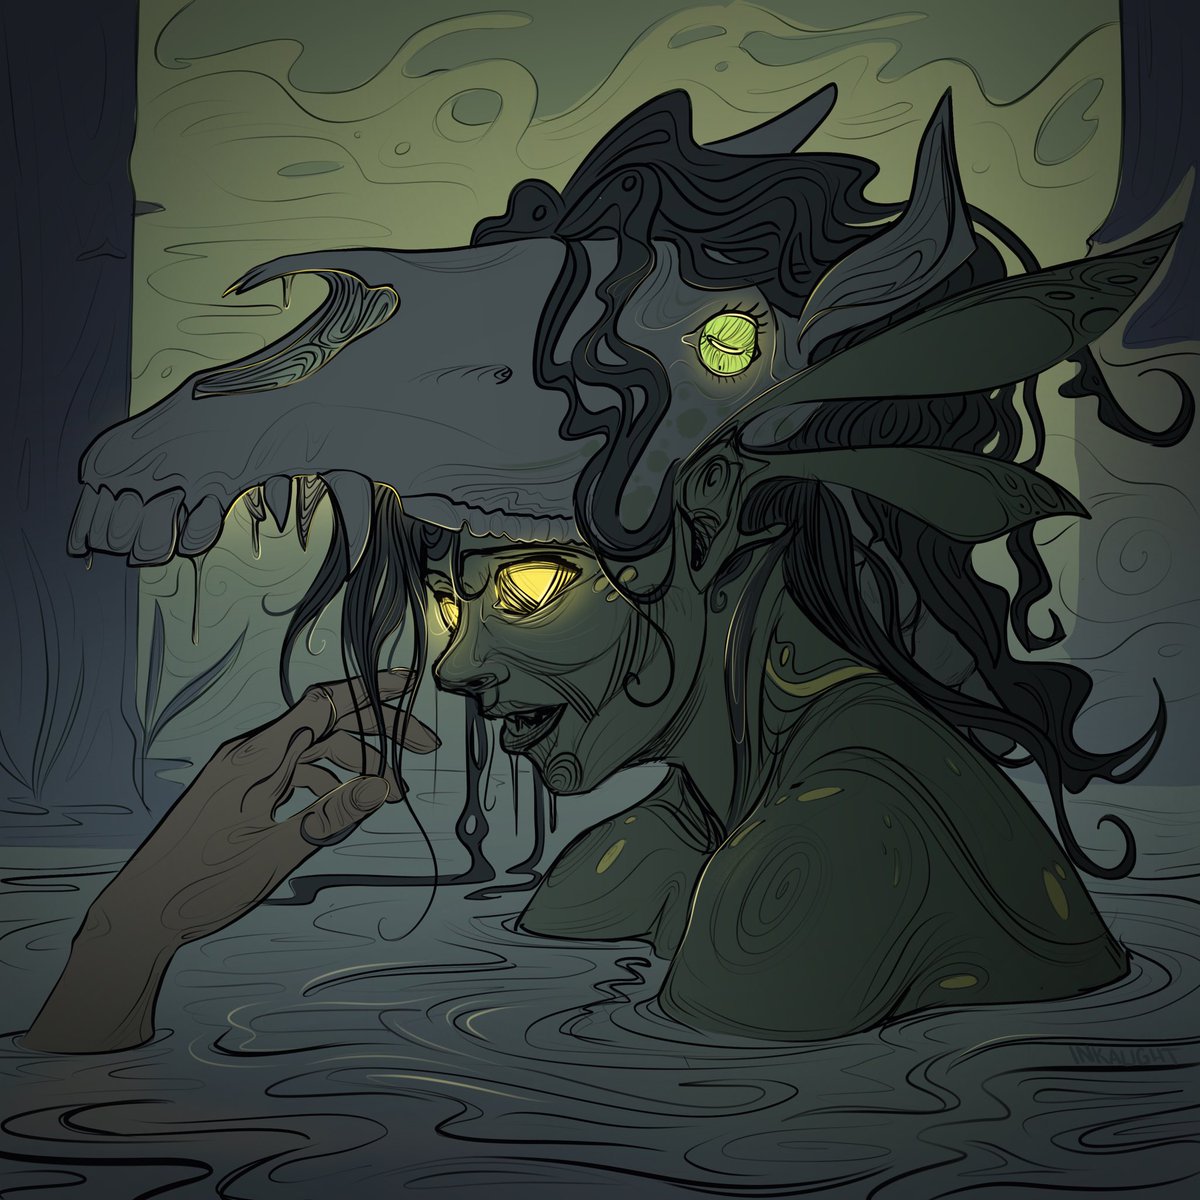 Day 7/31 Kelpie

Idk what to call this but here’s a Evil horse fishy woman thing 🤷‍♀️ 

#mythsofmay #mofm #mythsofmay2024 #mofm2024 #kelpie #artistsontwitter